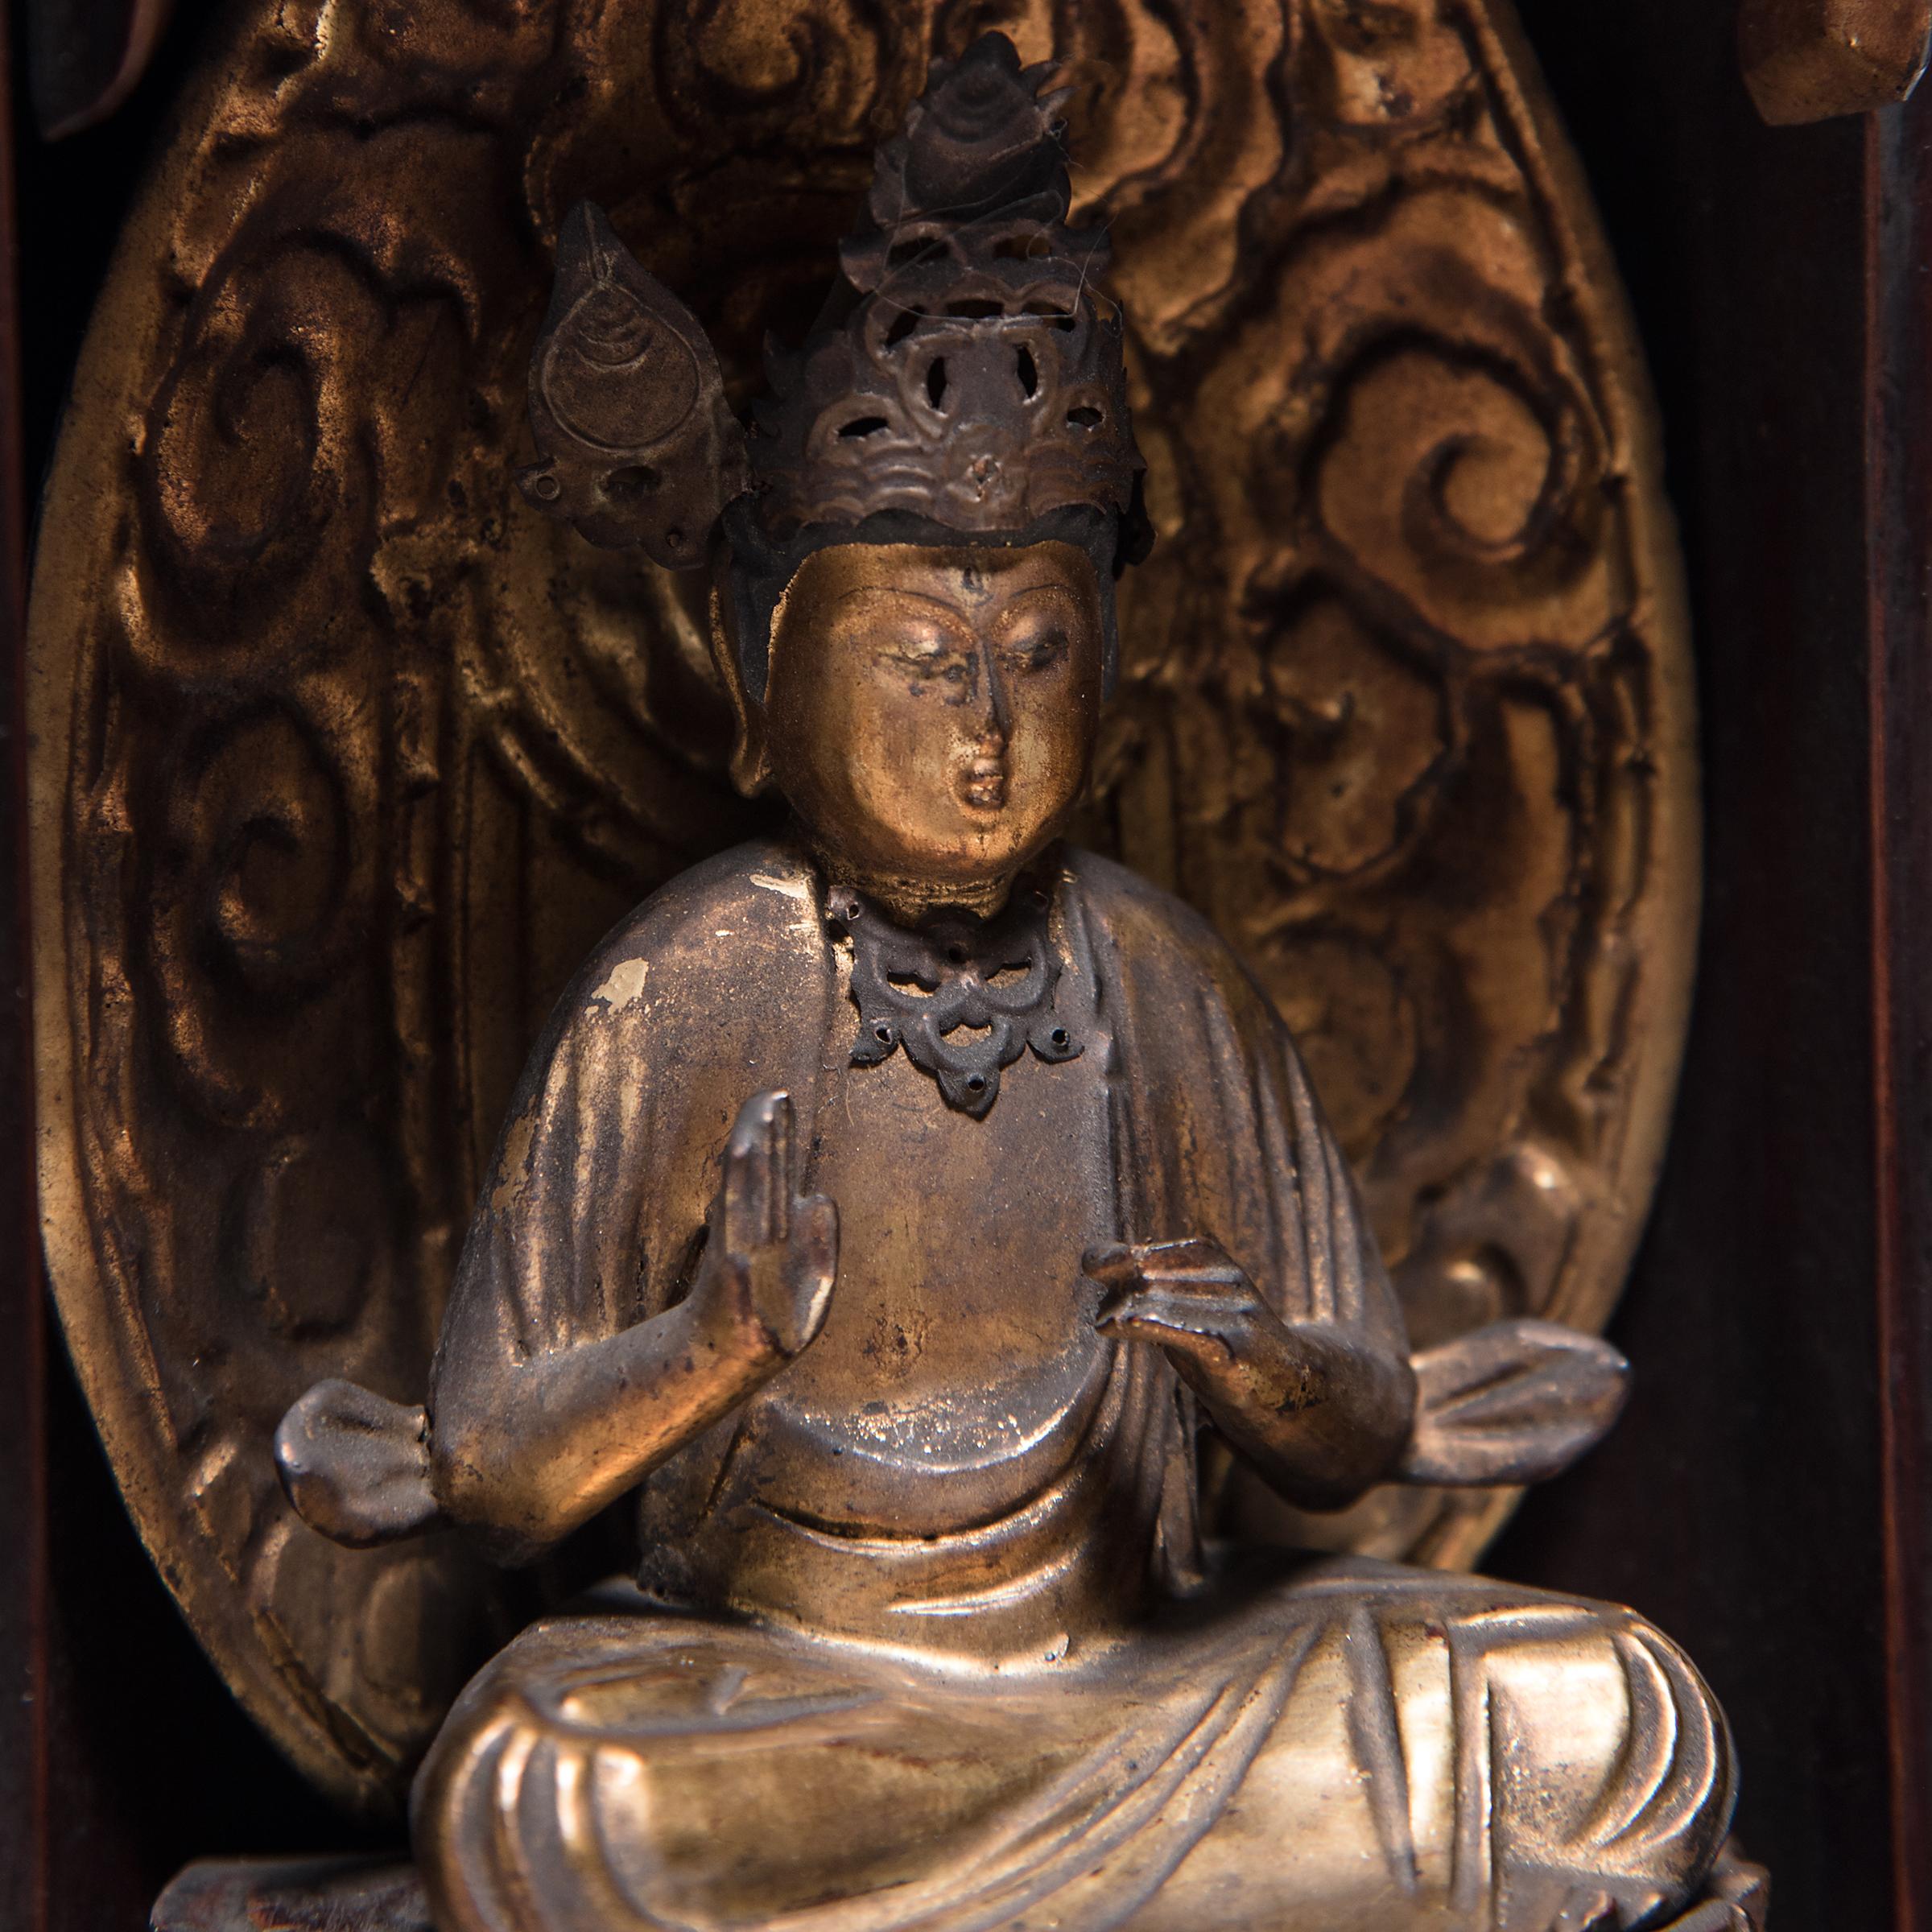 The simple exterior of even black lacquer that encases this 19th century Japanese traveling shrine belies the splendor within. The hinged doors open to reveal an intricately carved gilt figure of the bodhisattva Guanyin, known in Japanese Buddhism